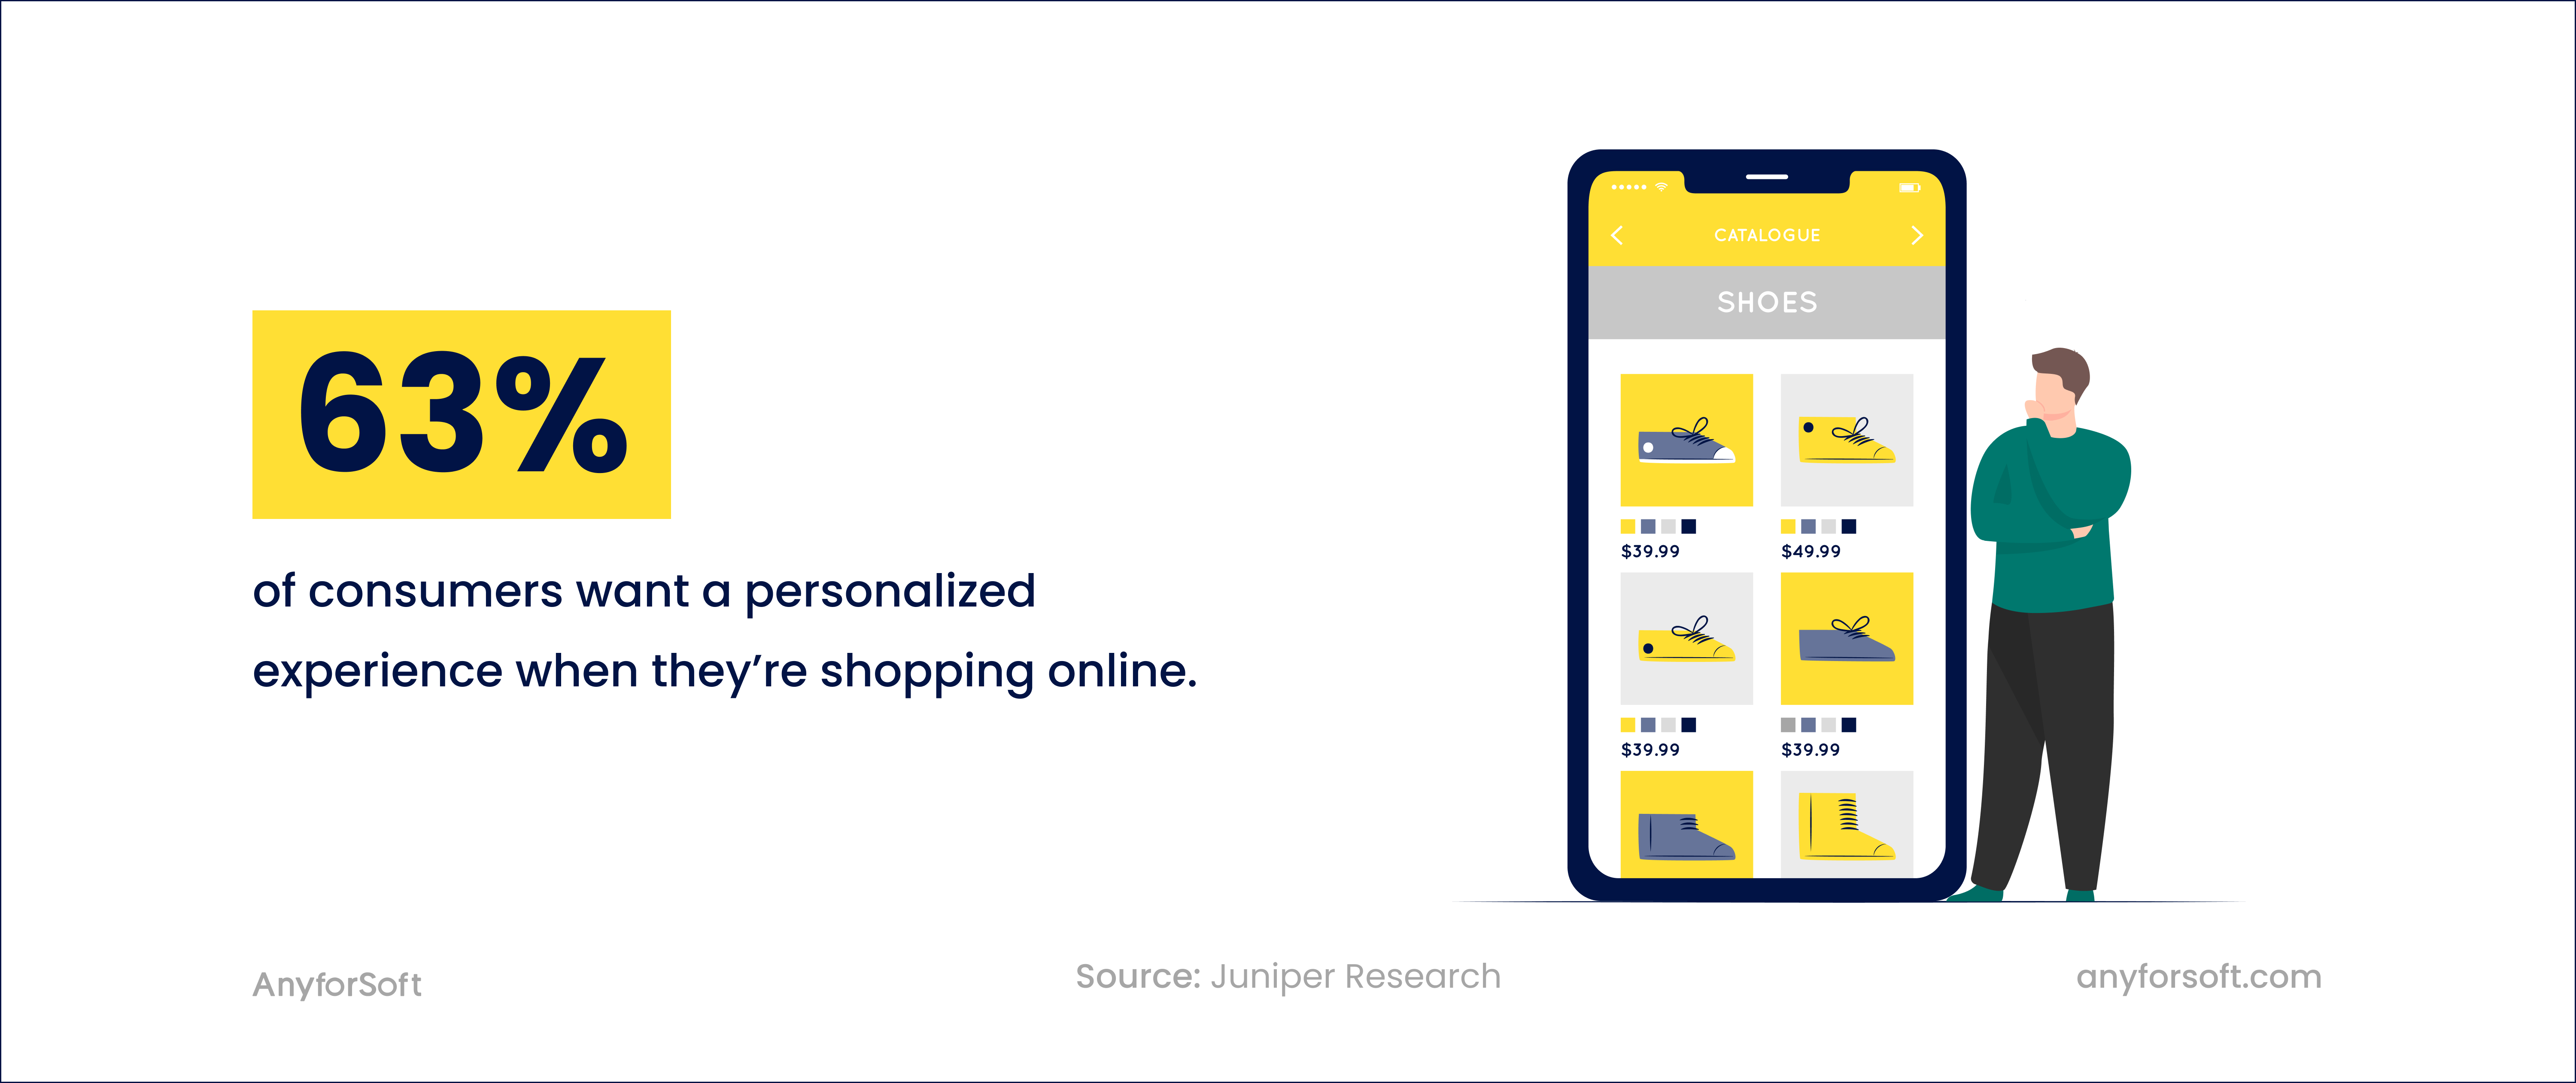 Consumers Want Personalized Experience